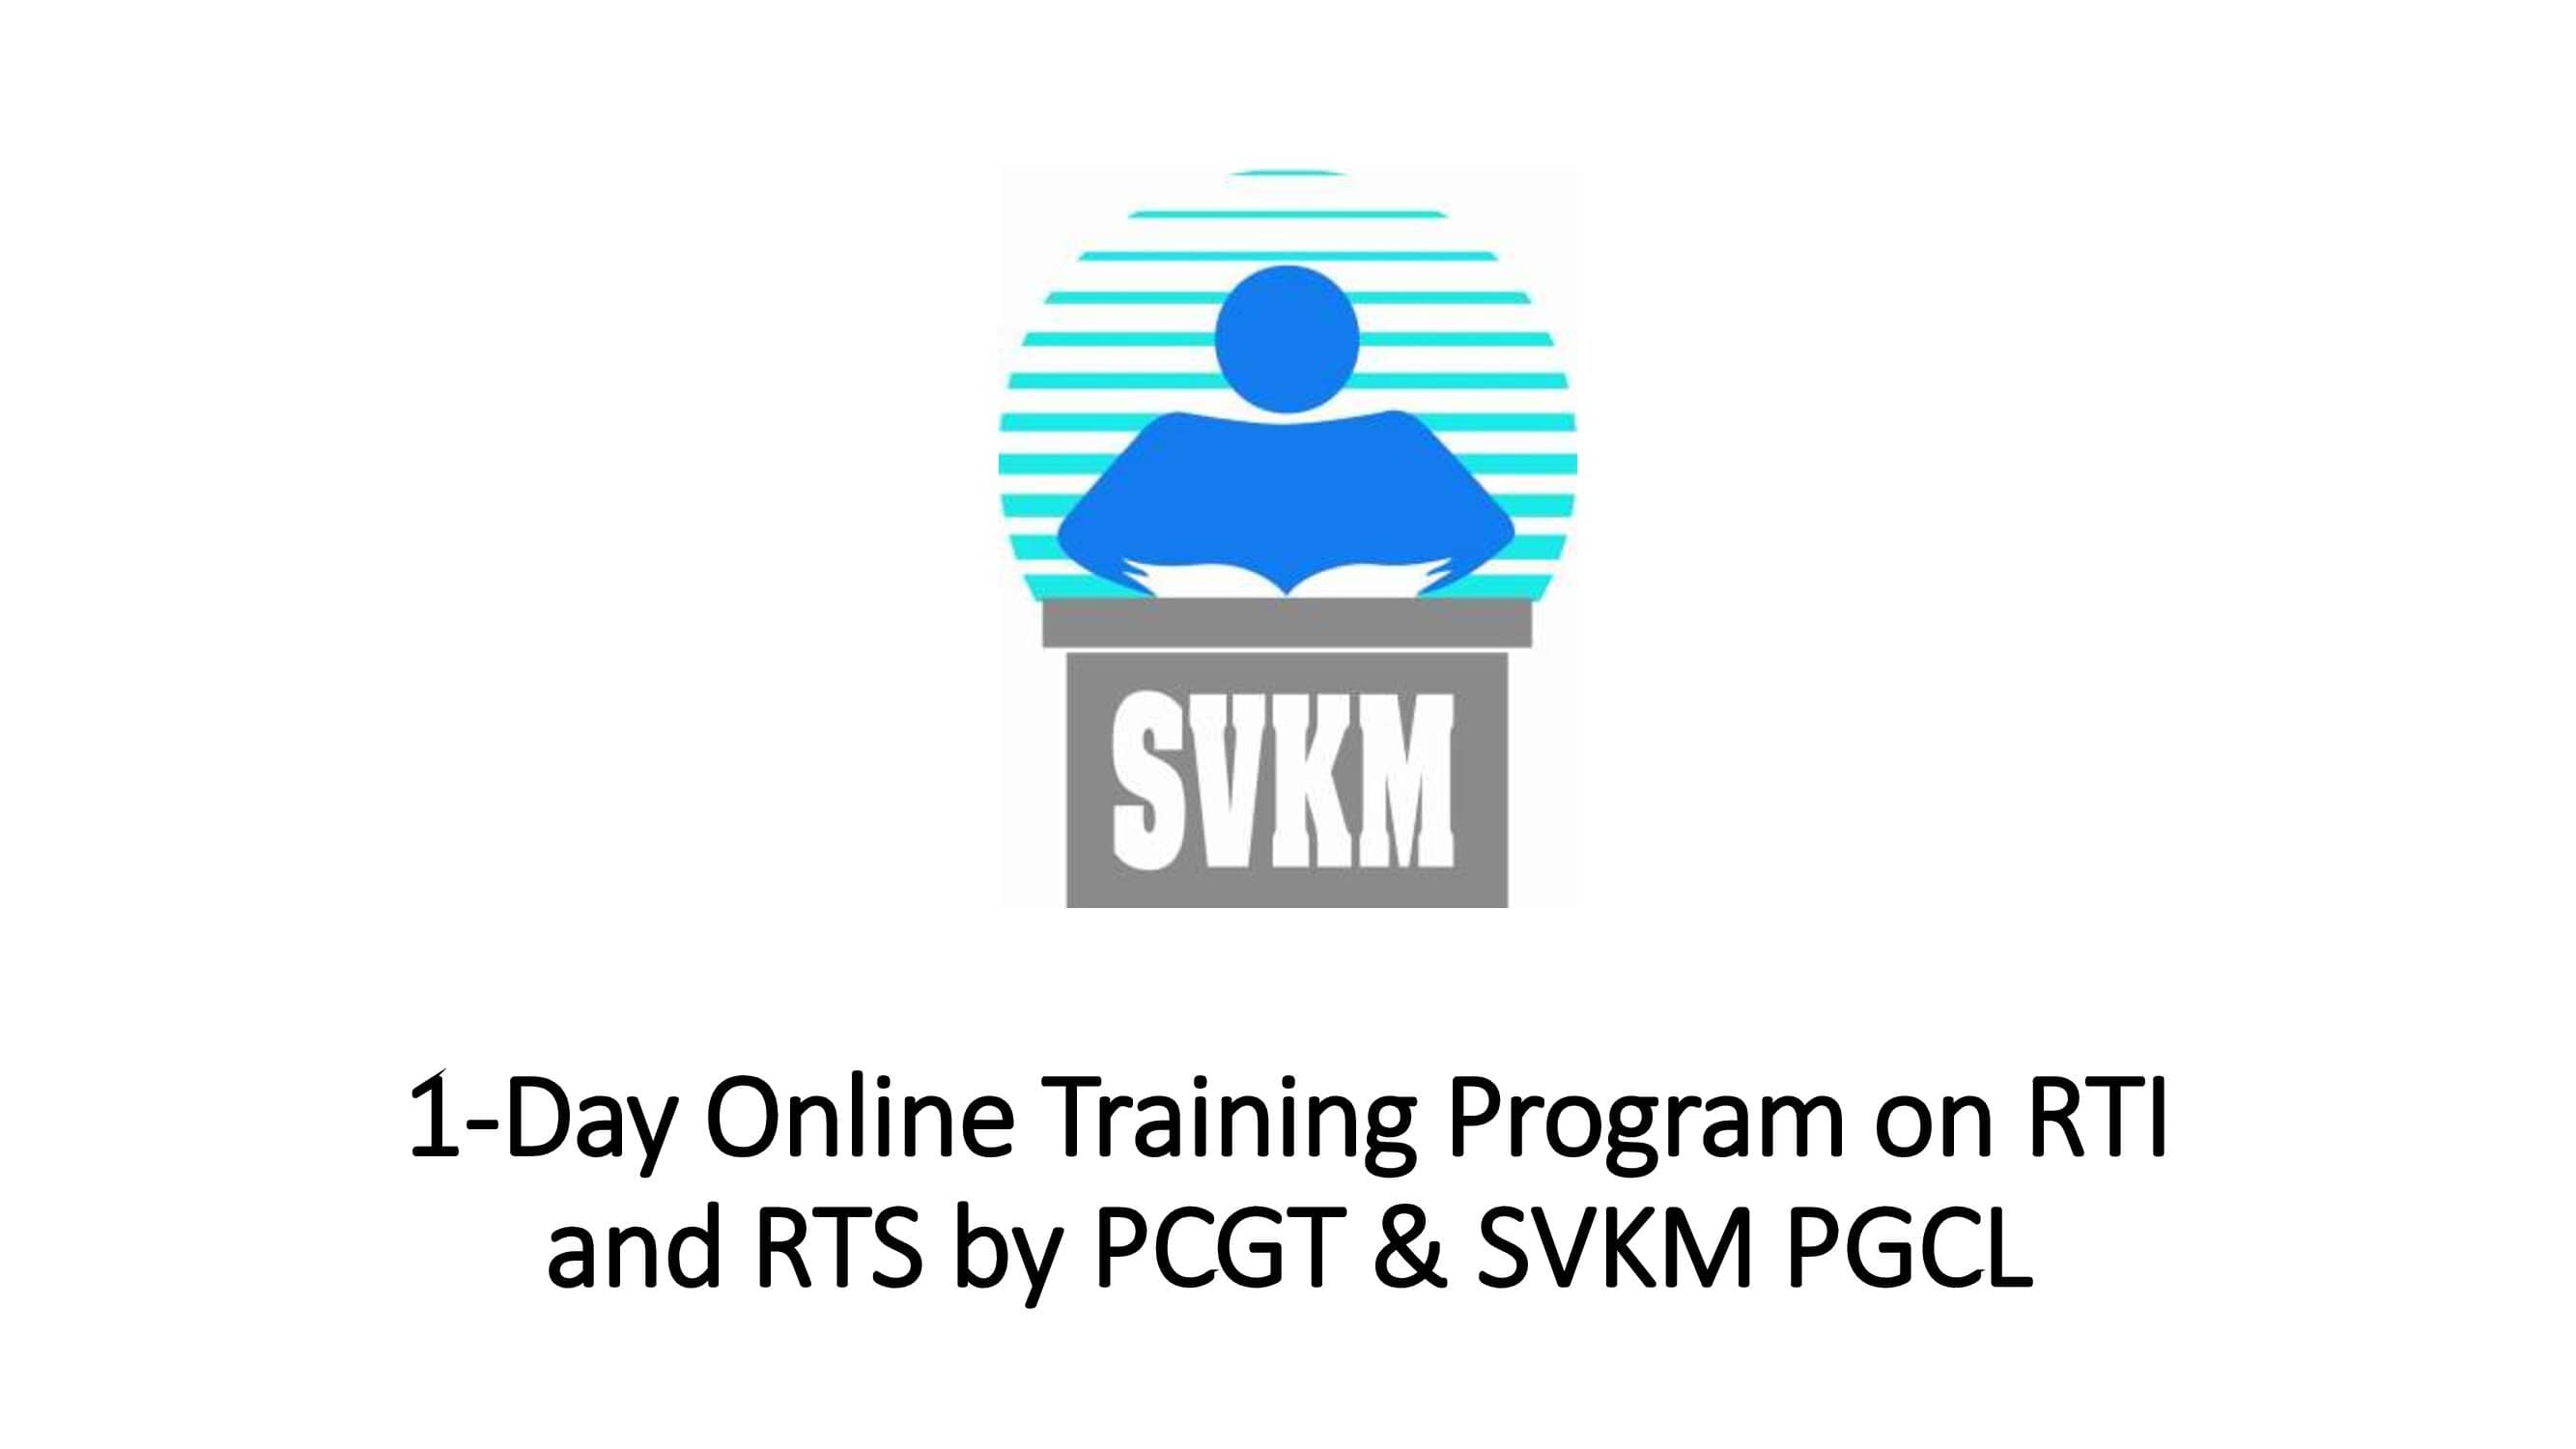 1-Day Online Training Program on RTI and RTS by PCGT & SVKM PGCL